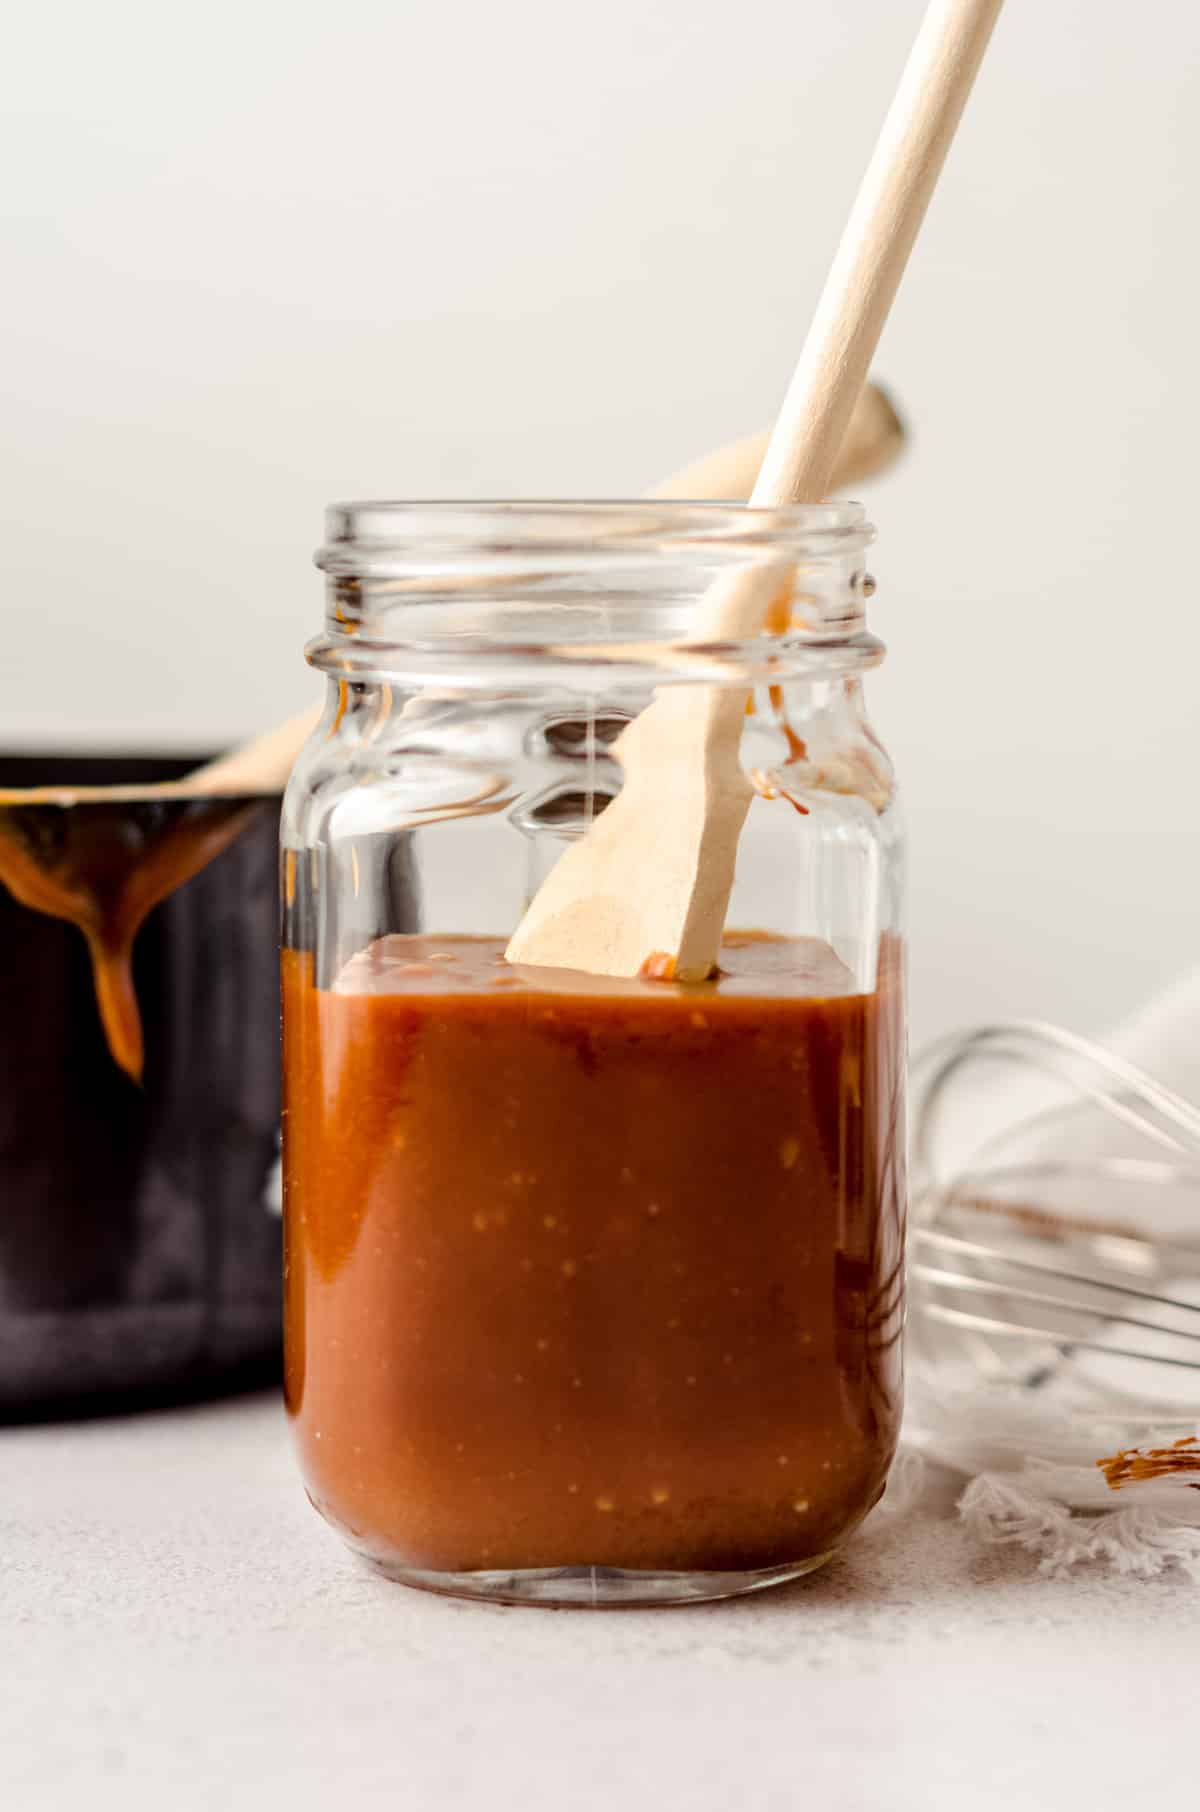 jar of salted caramel sauce with a wooden spoon sitting in it